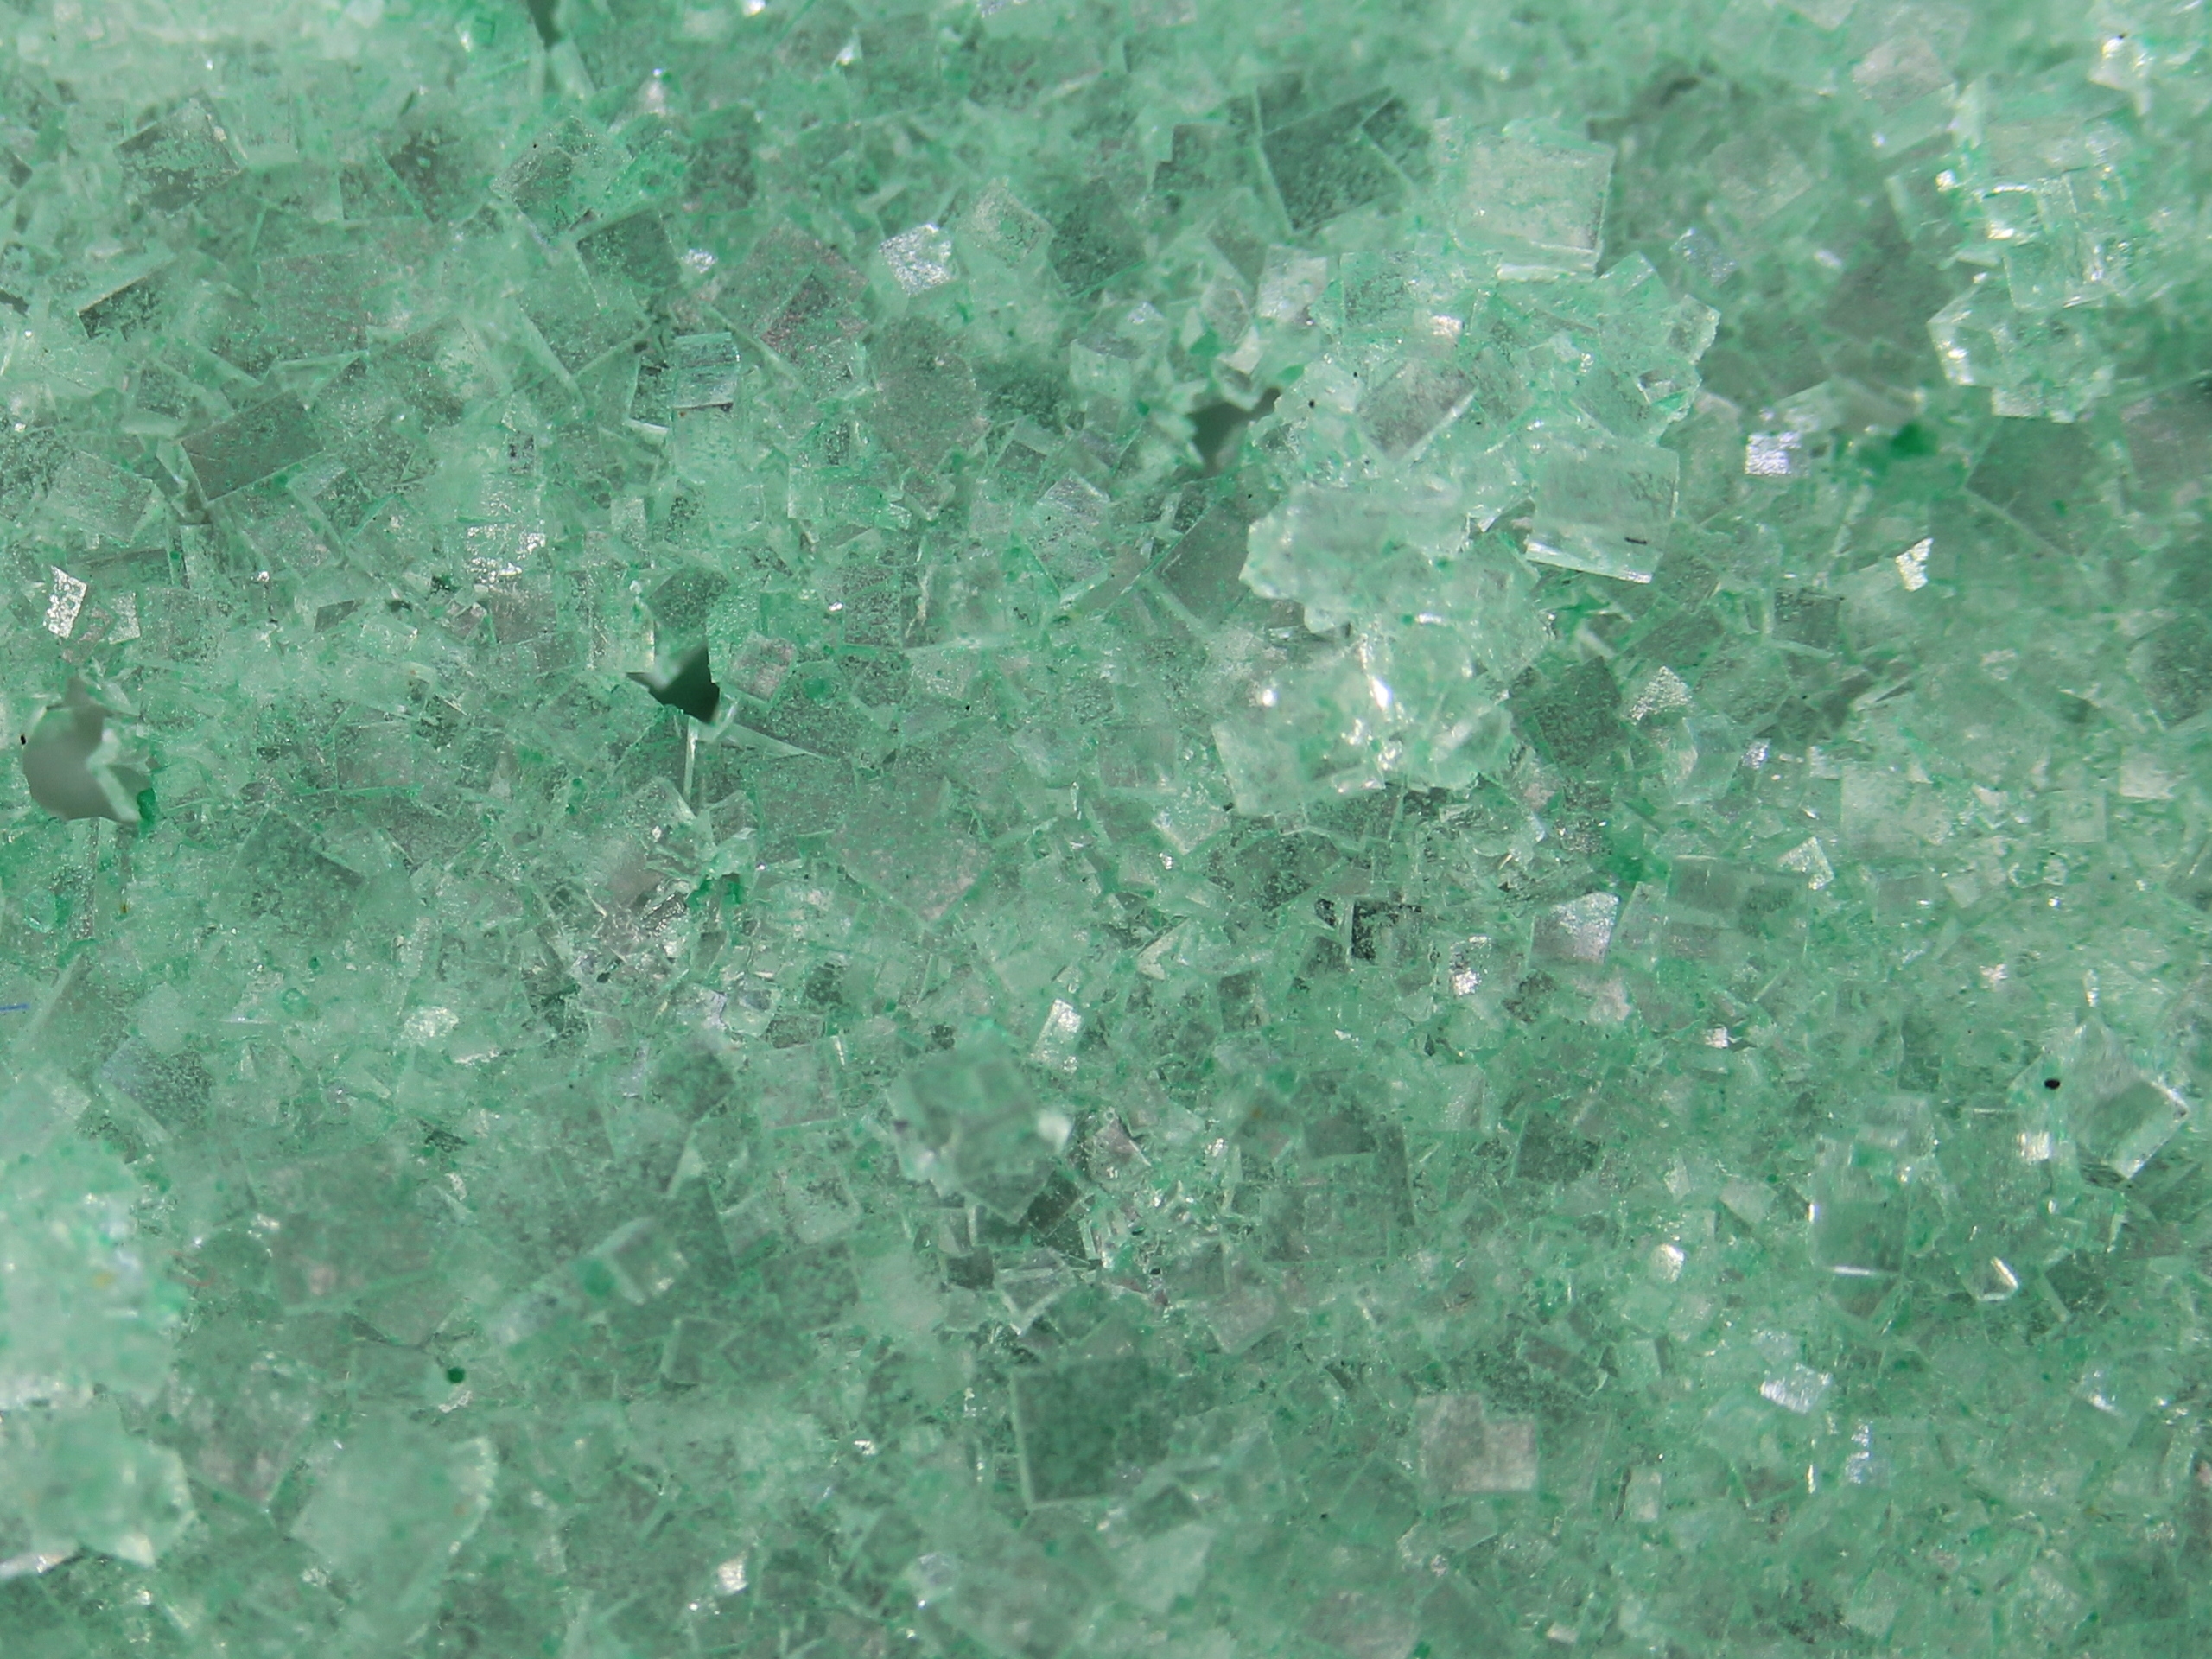 Halite with secondary copper mineral inclusions